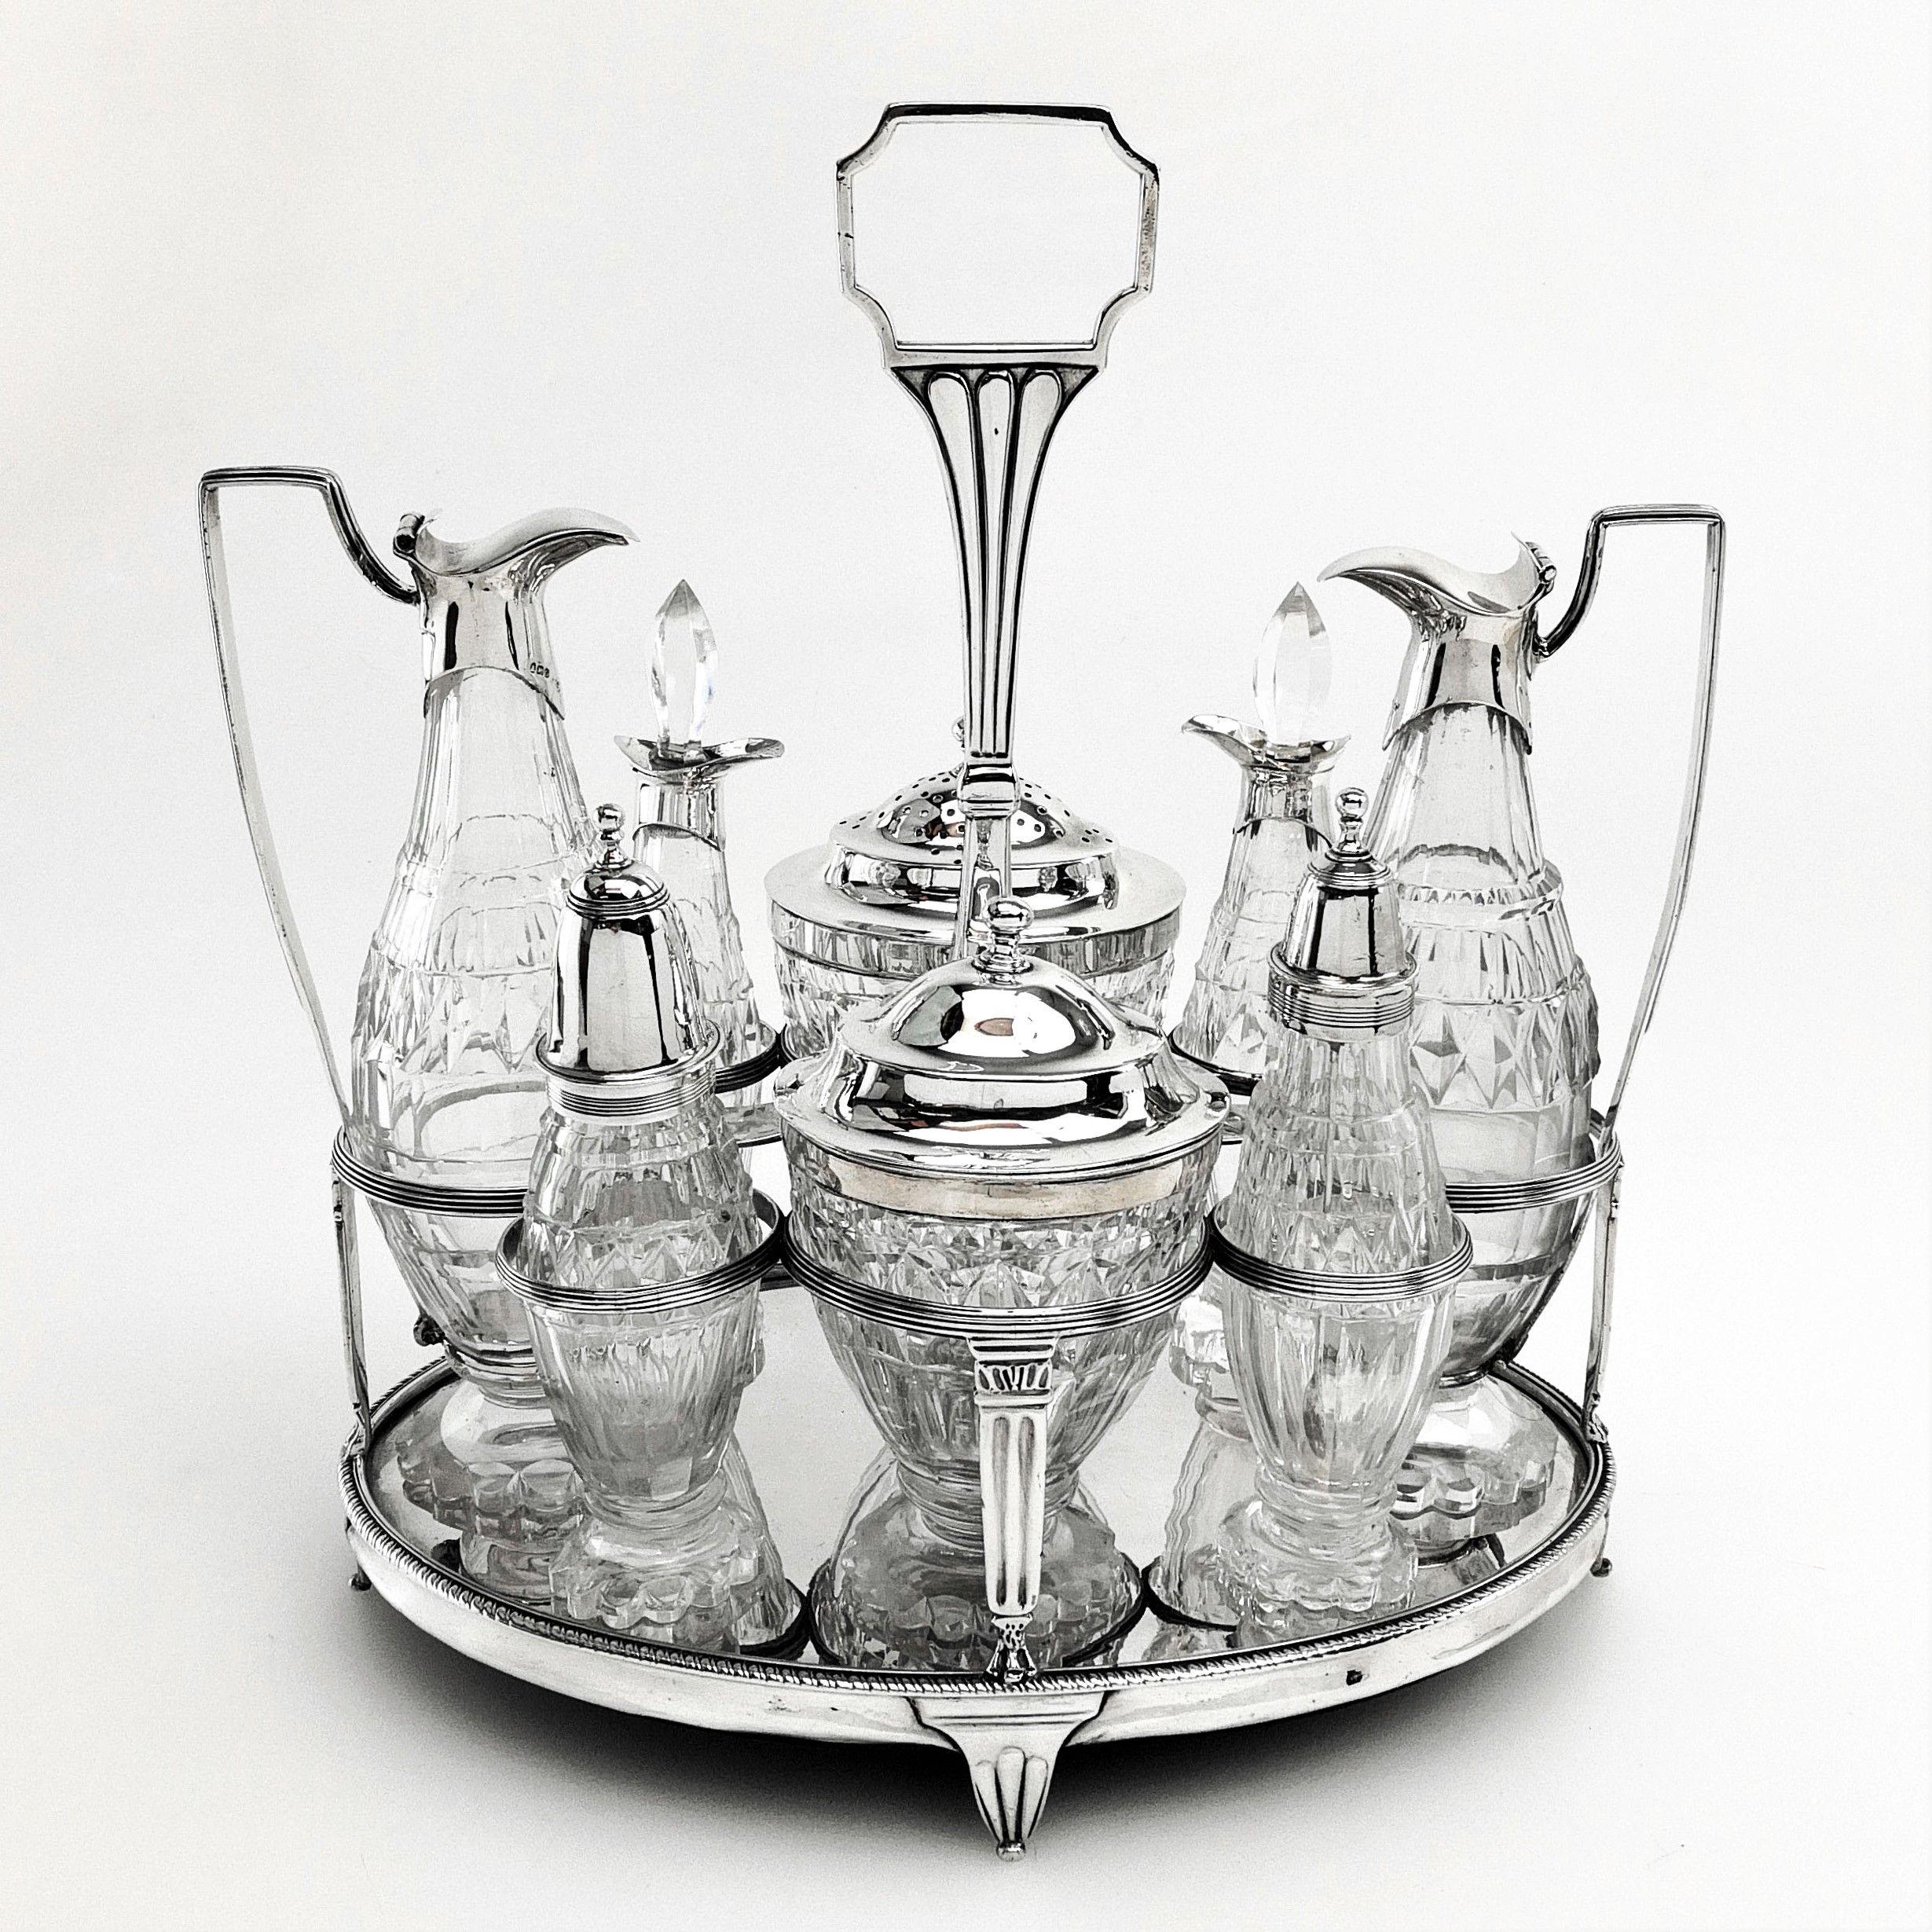 A magnificent Georgian solid Silver and cut Glass Cruet Set. This set is of substantial size and consists of a solid silver stand and 8 condiment containers. These include a mustard pot, oil & vinegar pourers, a Caster and four other containers